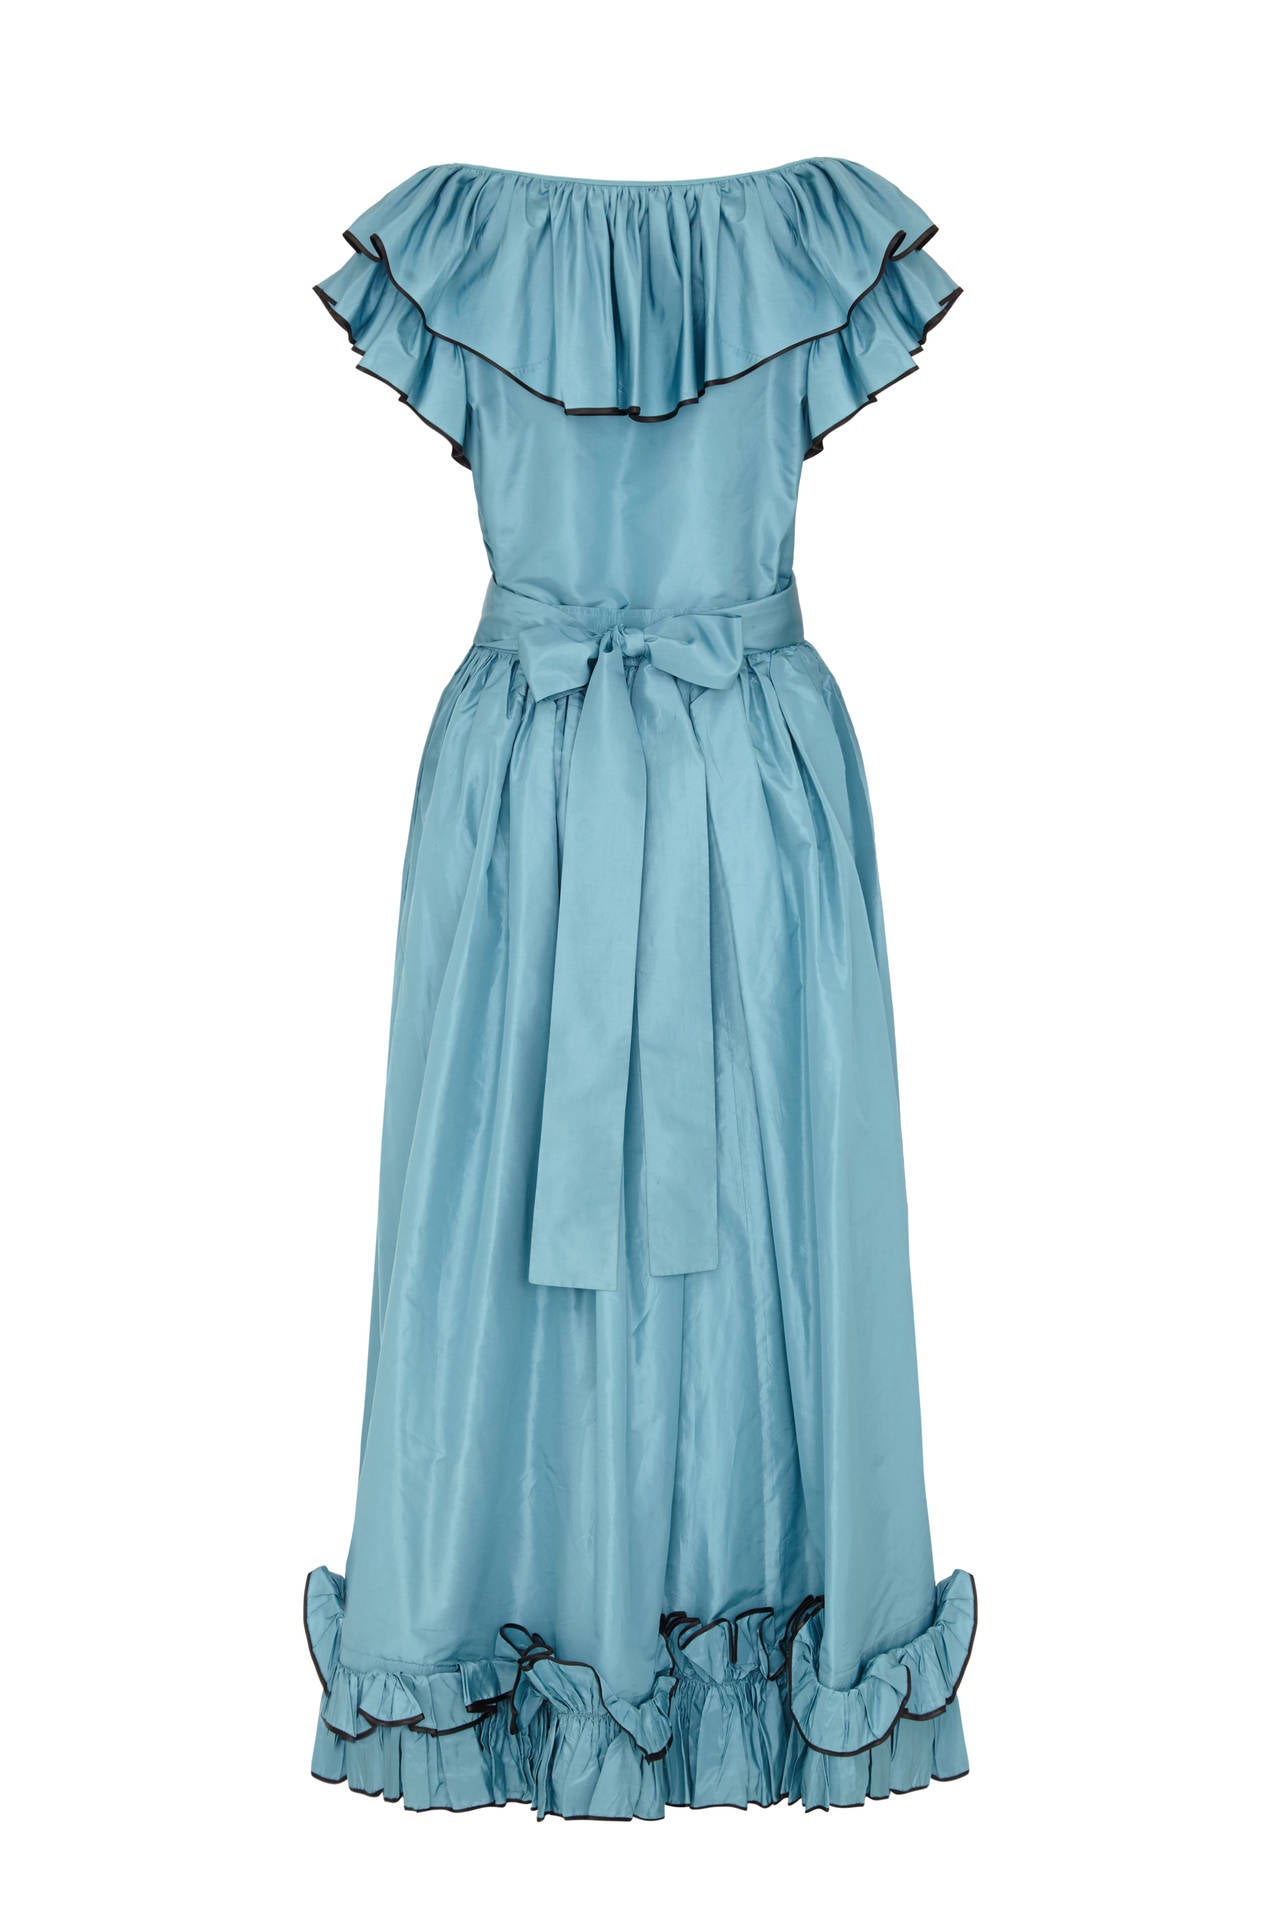 Mid 1970s blue taffeta skirt and top set with ruffle edging by Yves Saint Laurent.  This set comes with matching tie belt and features a bow to the front of the top.  All ruffles are edged with black and the skirt fastens at the side with a zip. 